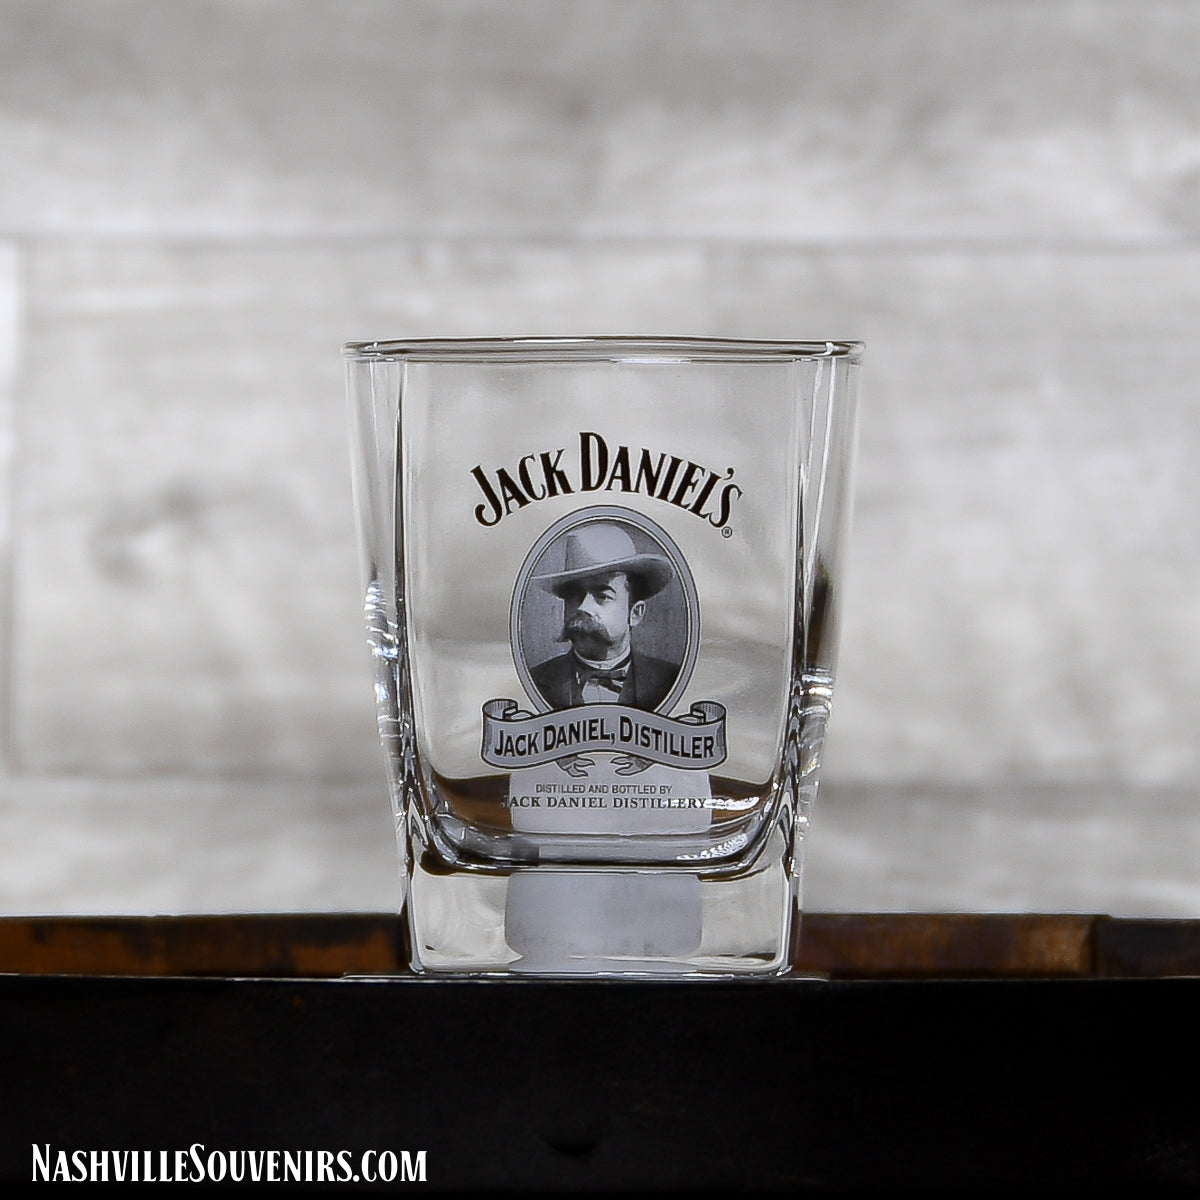 Officially licensed Jack Daniels Cameo Double Old Fashioned Glass. FREE SHIPPING on all US orders over $75!